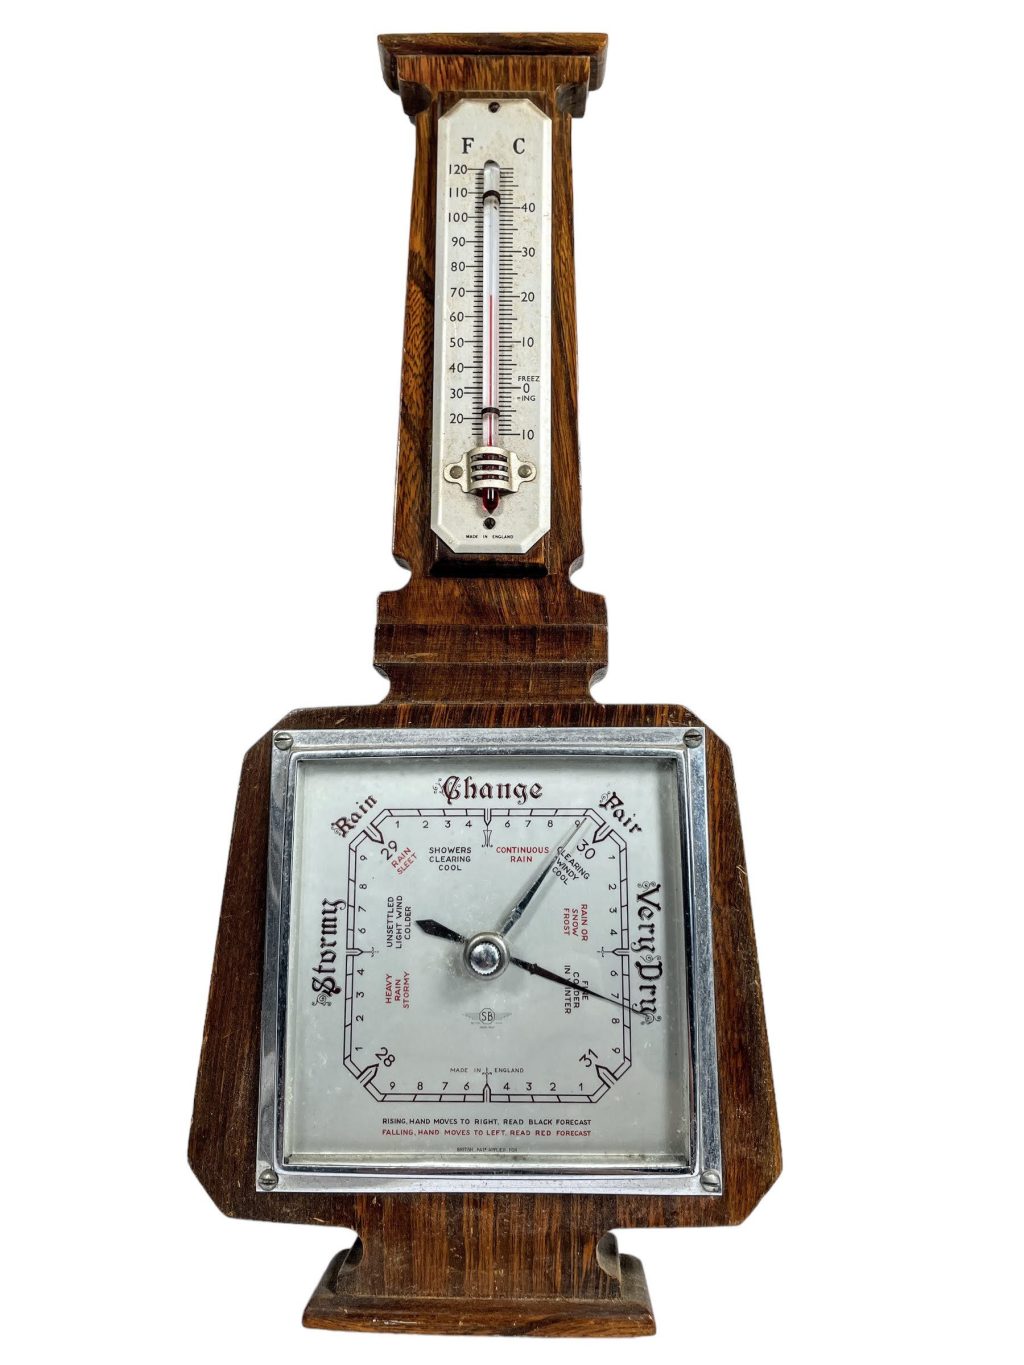 Vintage French Square Shaped Metal Wood Barometer Barometre Thermometer Weather Forecasting Instrument Hanging Wall c1950-60’s